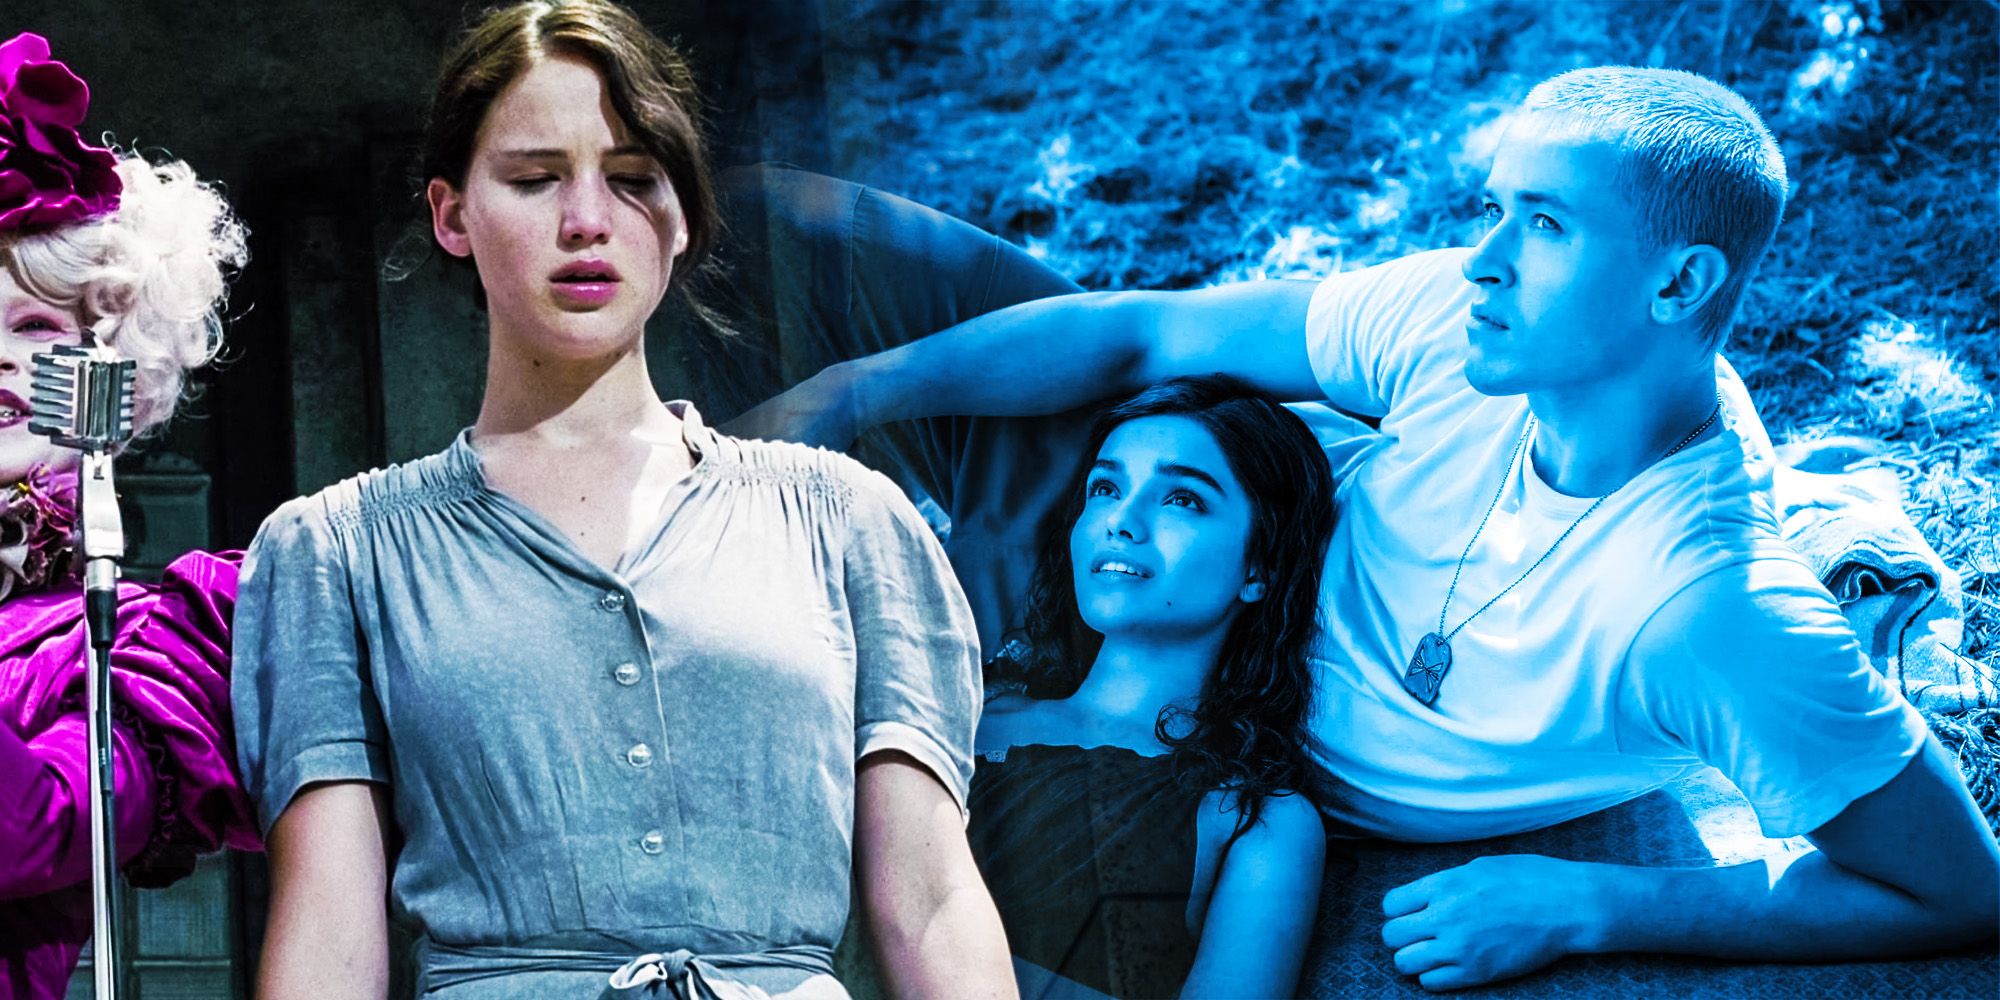 Jennifer Lawrence as Katniss in Hunger Games and Rachel Zegler and Tom Blyth as Lucy and Snow in Ballad Of Songbirds and Snakes